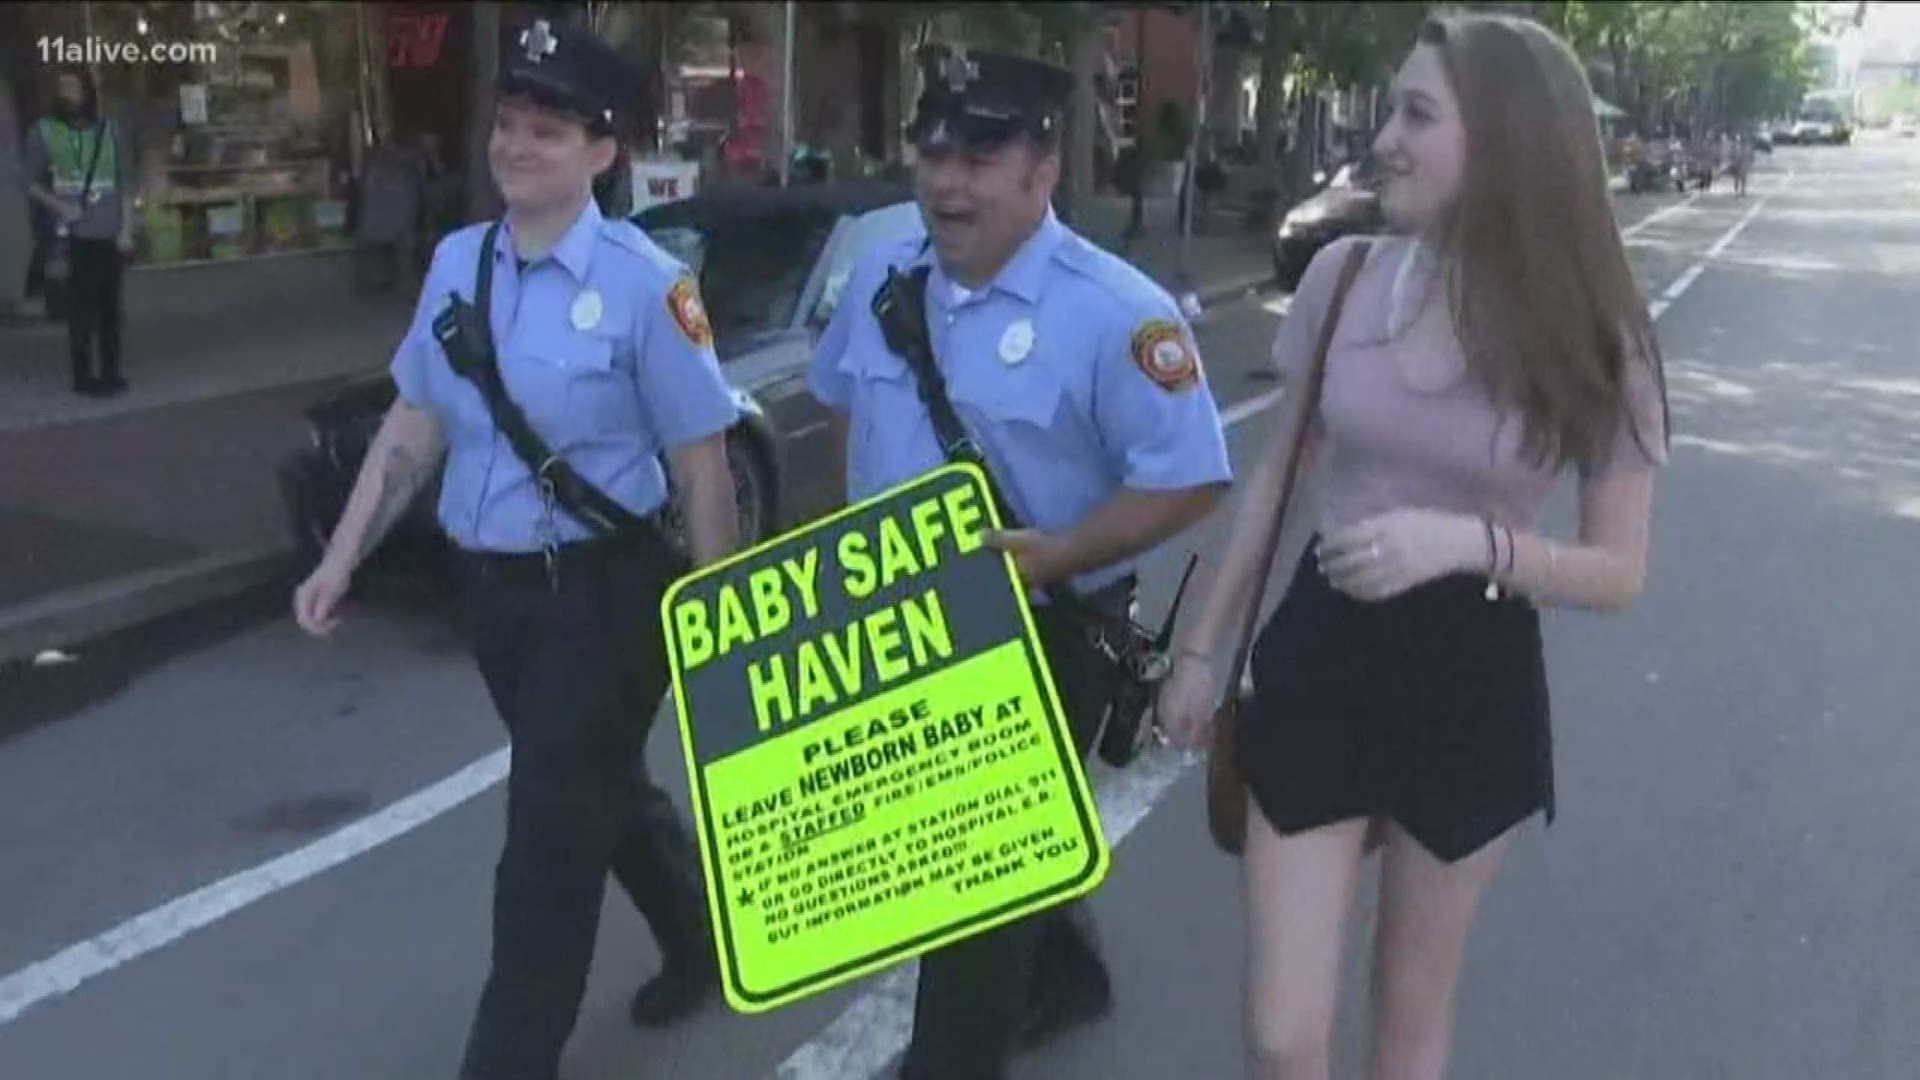 A group in Massachusetts says they have a solution to the large number of abandoned infants that may help in Georgia. One way is to use teens and youth for marketing the Safe Haven law.